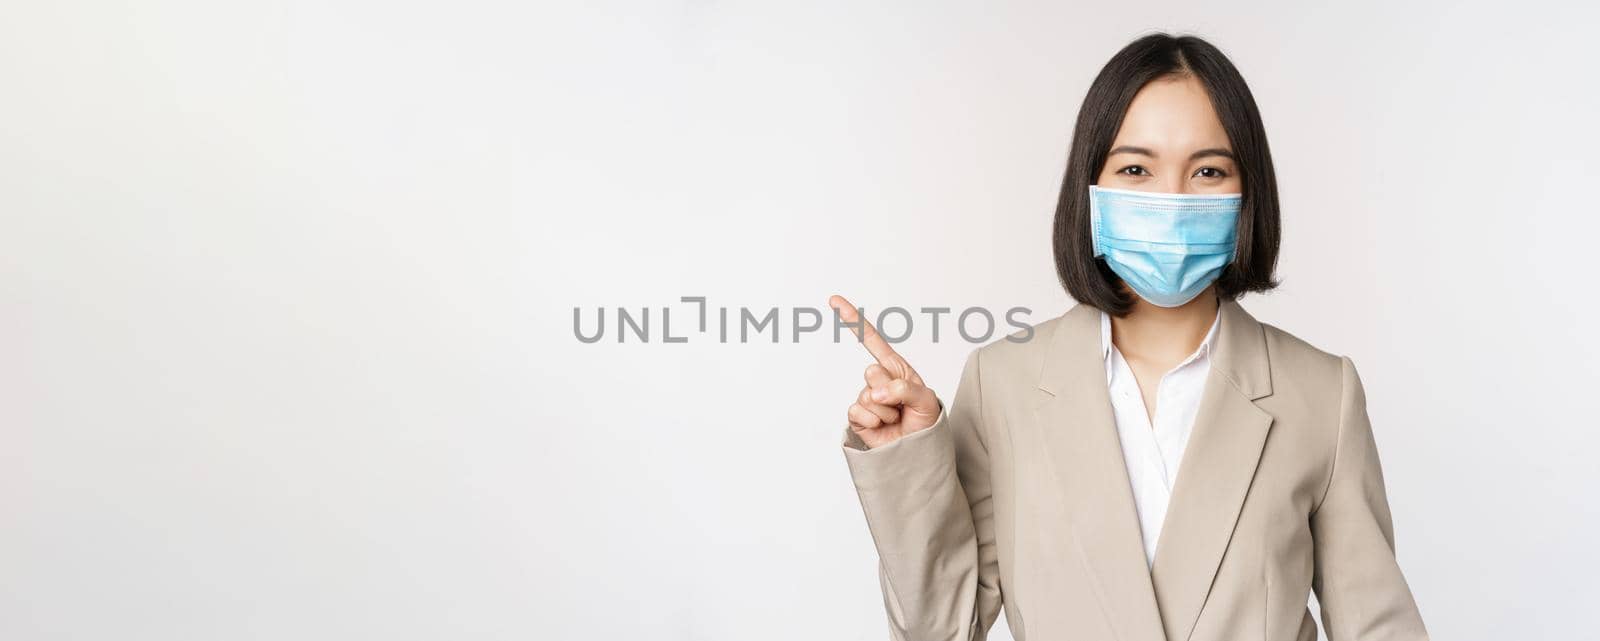 Coronavirus and work concept. Portrait of woman in medical face mask, pointing finger left, showing logo or banner, advertisement, white background.